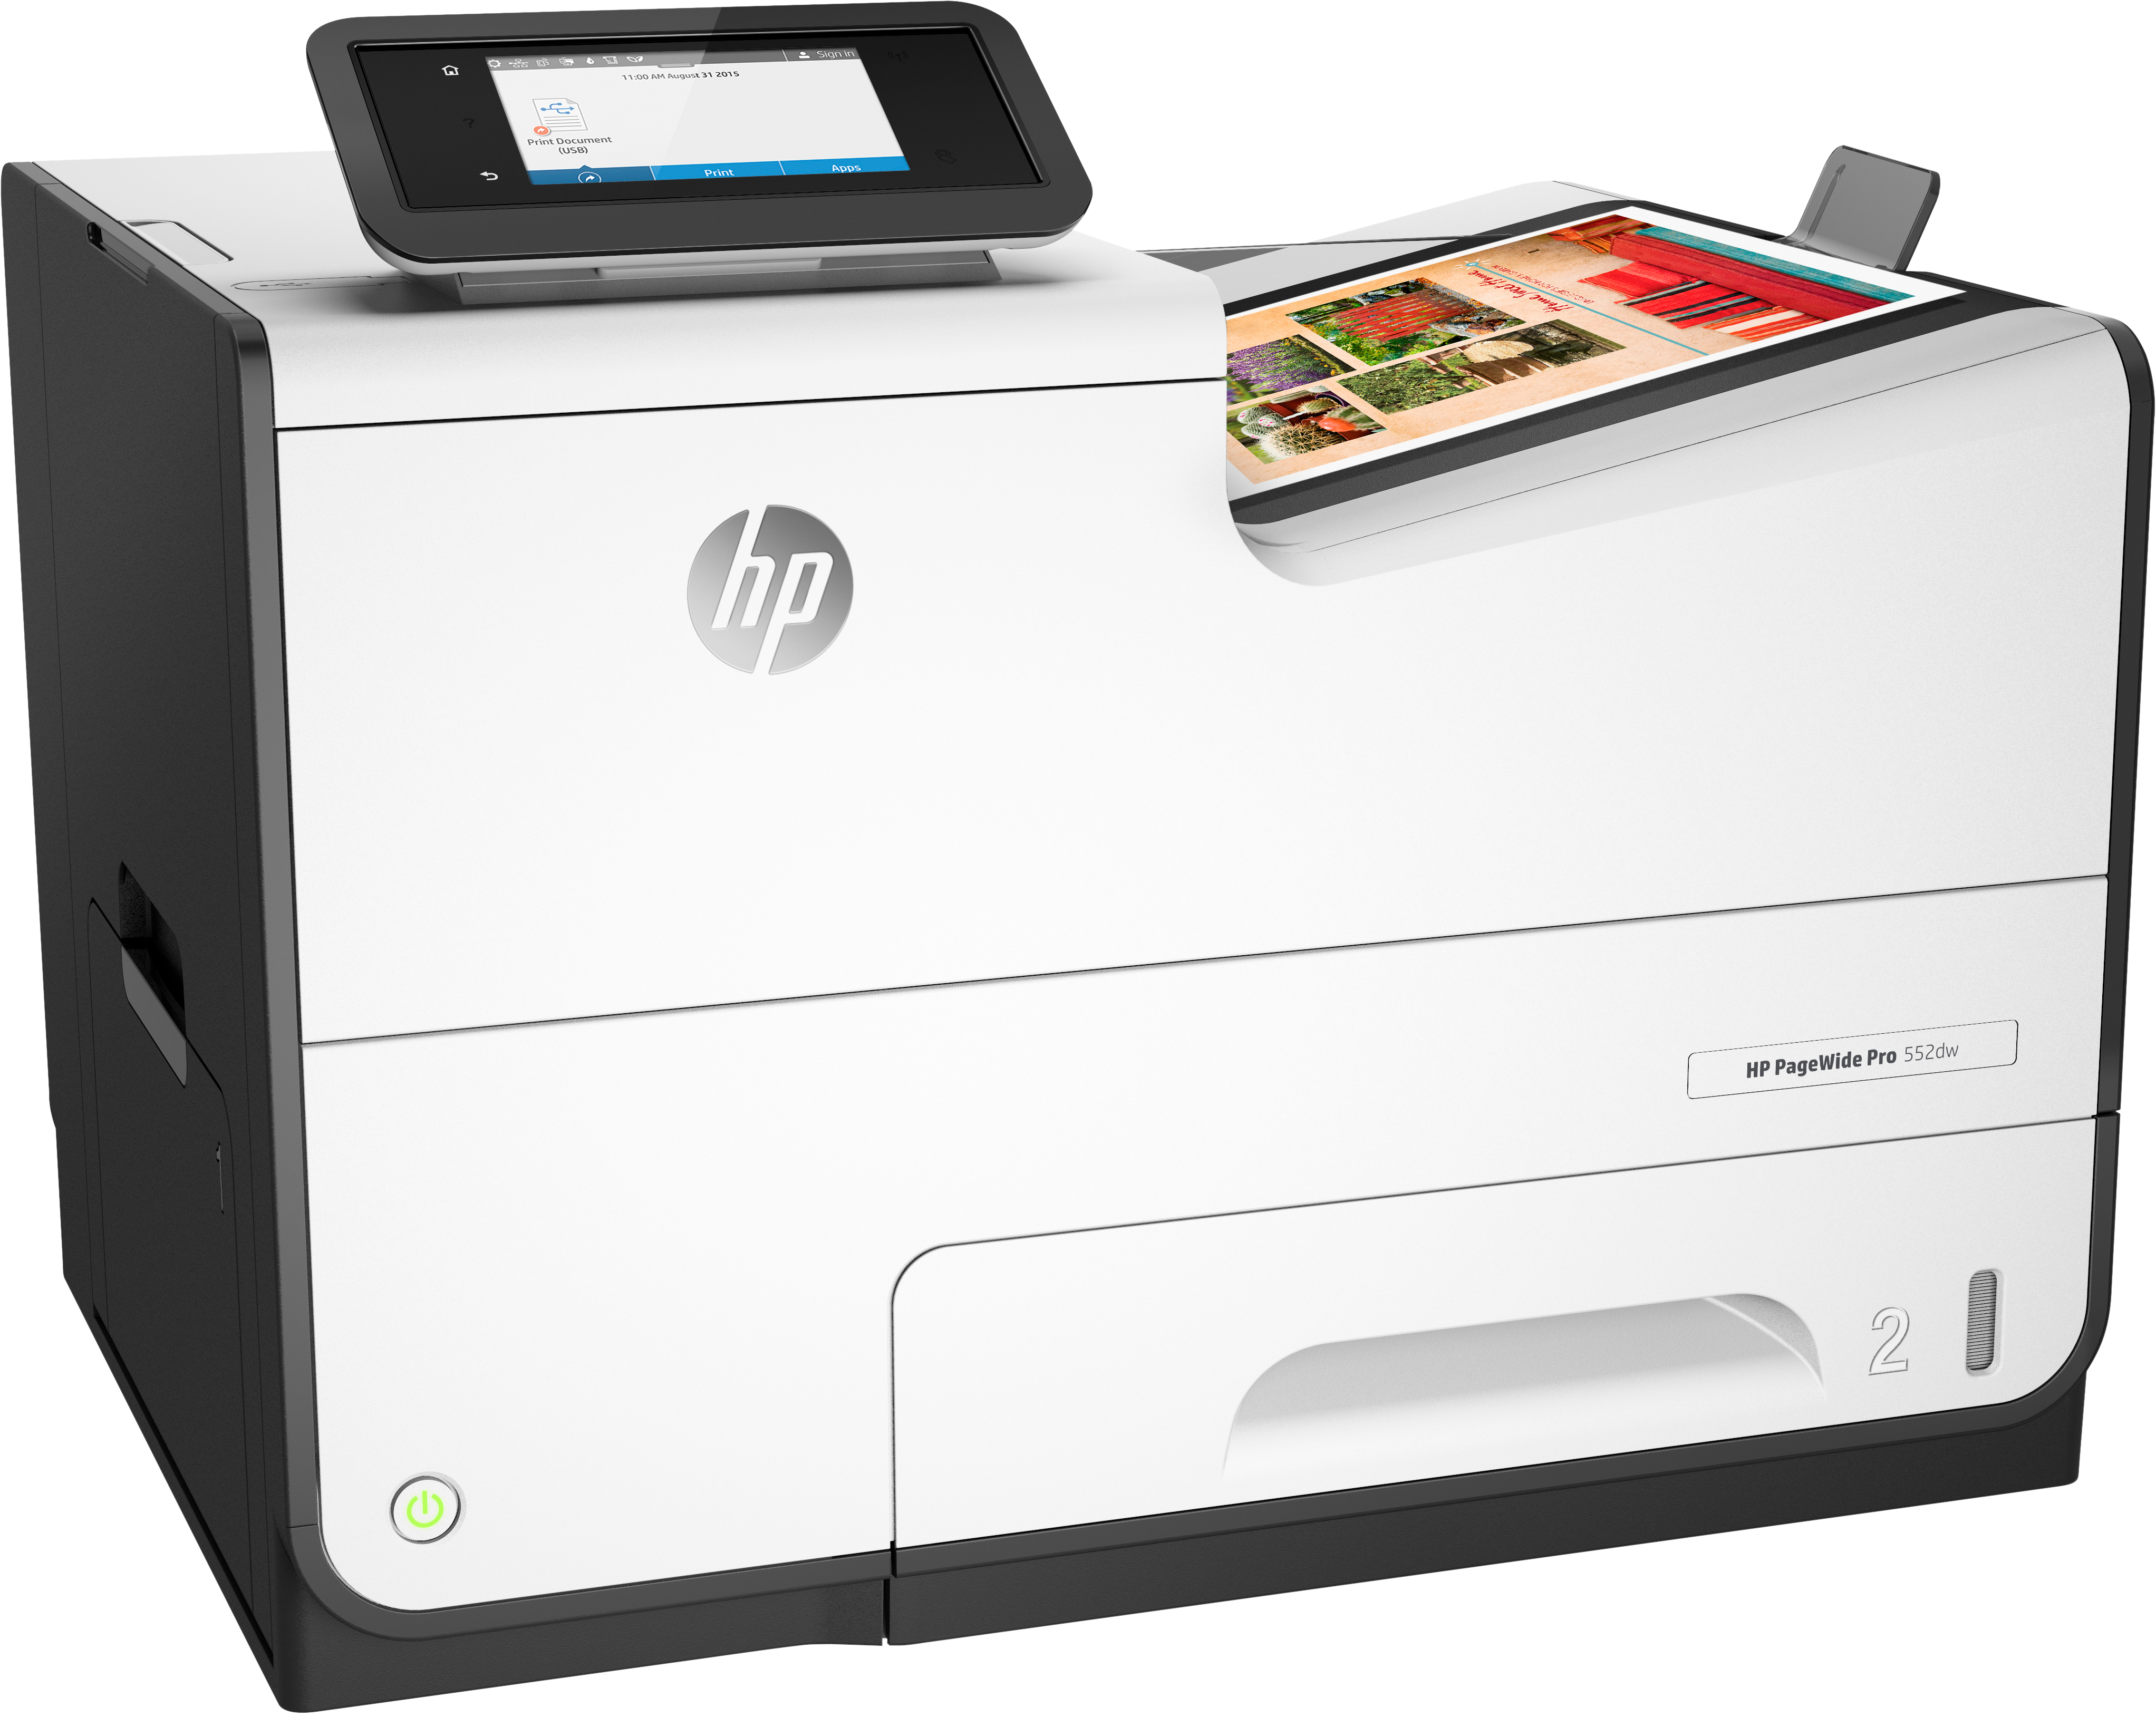 A White And Black Printer With A Tablet